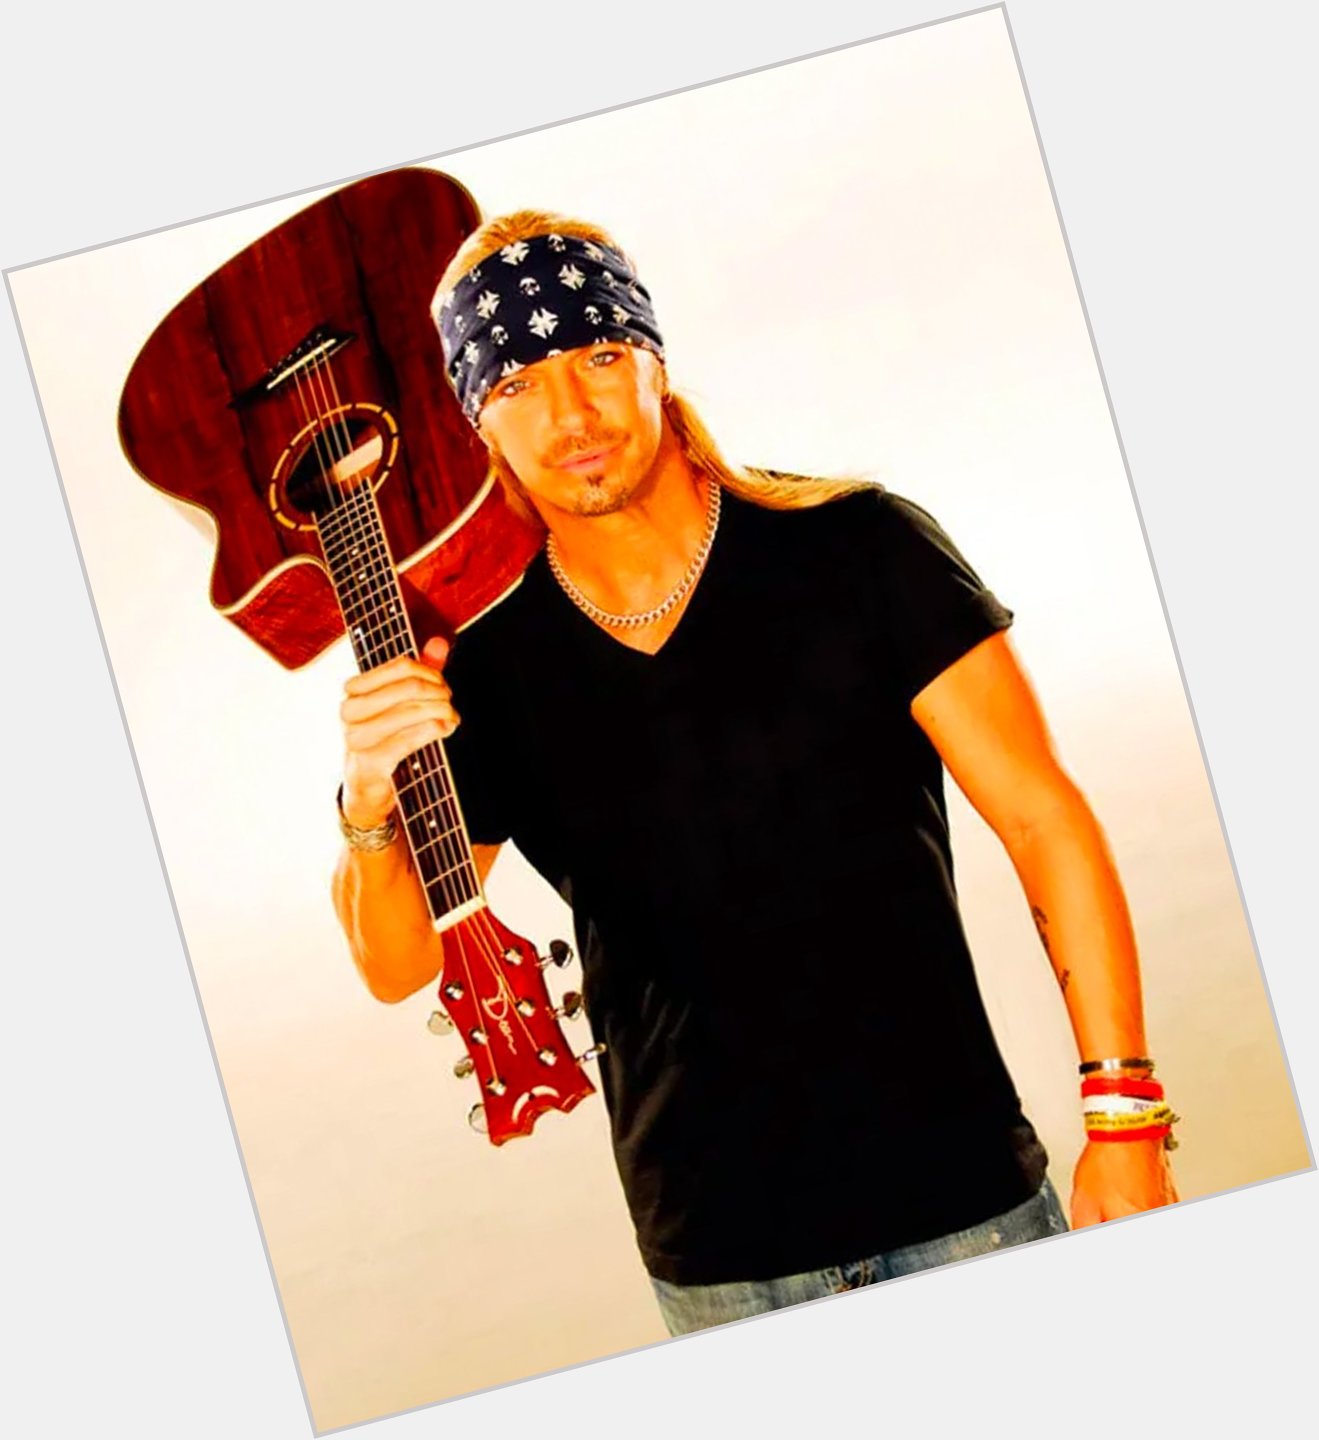 Join us in wishing a Happy Birthday to Artist Bret  Michaels    